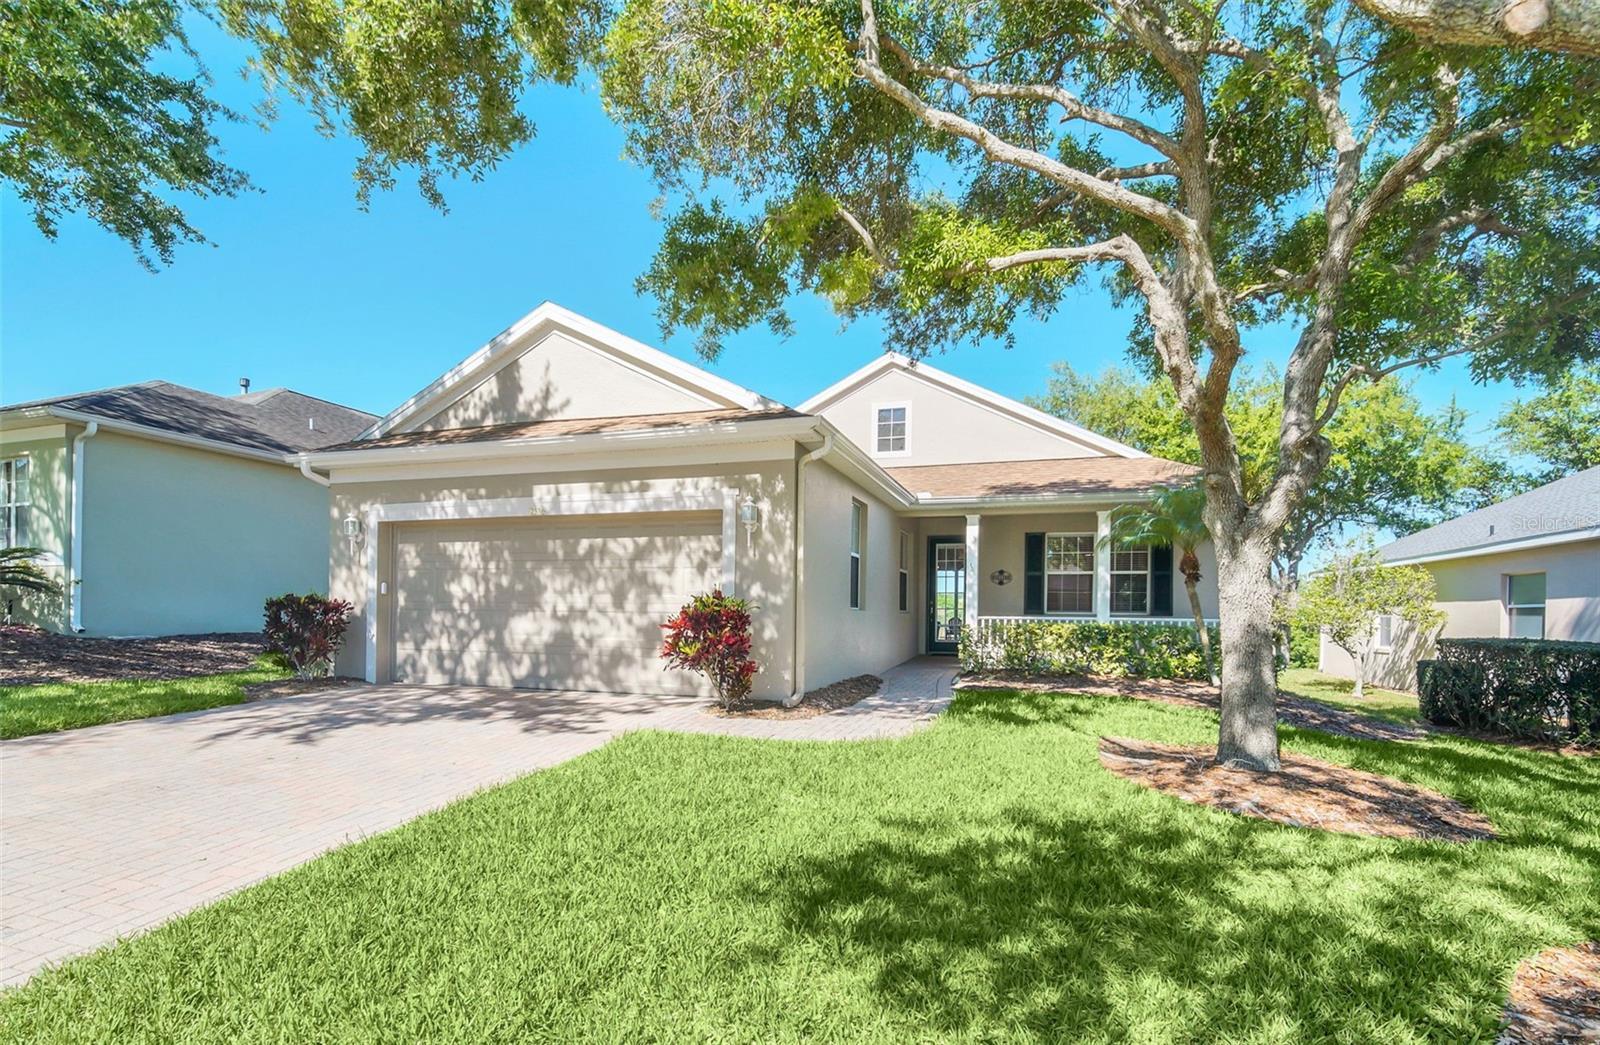 Photo one of 2536 Castle Pines St Clermont FL 34711 | MLS G5079954